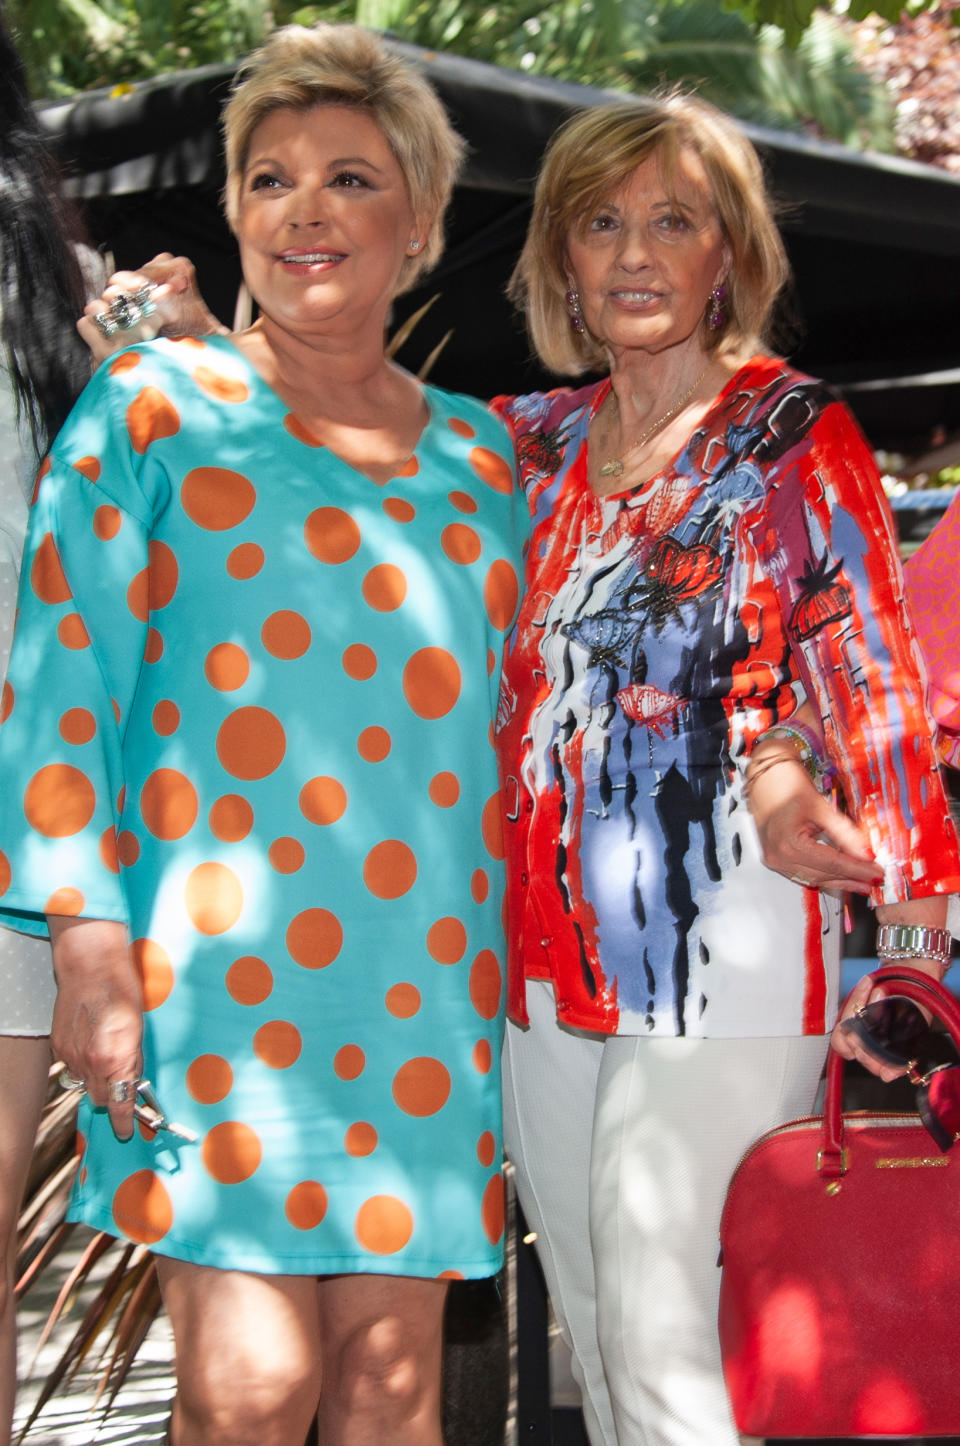 MADRID, SPAIN - JUNE 18: Terelu Campos (L) and Maria Teresa Campos (R) attends a lunch to celebrate the Maria Teresa Campos's 78th birthday on June 18, 2019 in Madrid, Spain. (Photo by Europa Press Entertainment/Europa Press via Getty Images)